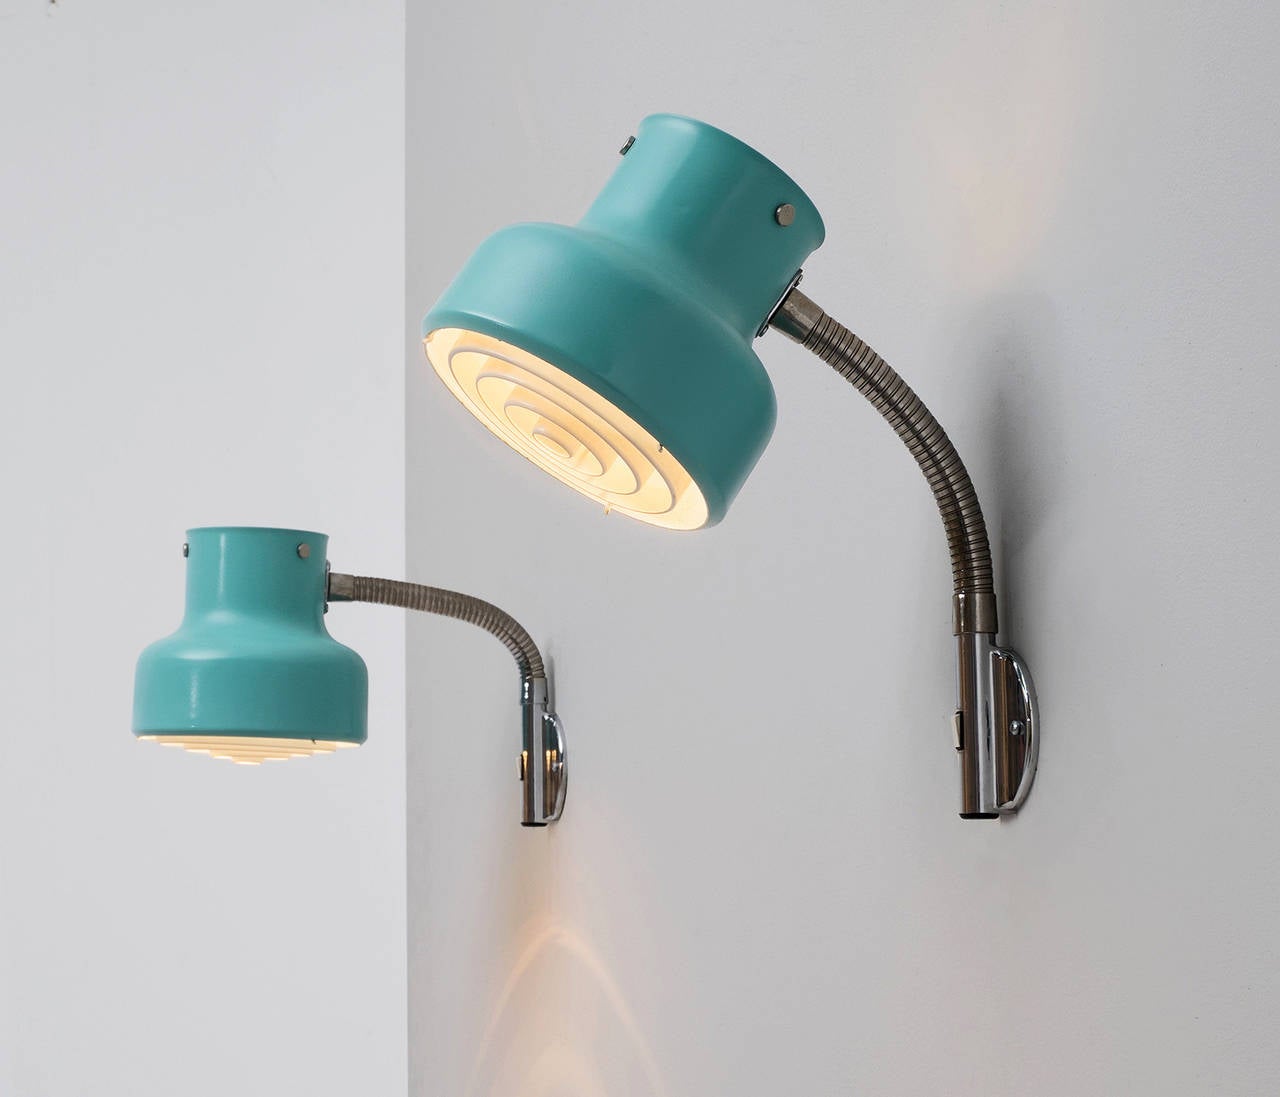 Ateljé Lyktan, Anders Pehrson, wall lights, steel, Sweden, 1970s.

These adjustable wall lights feature a turquoise to green shade with several steel rings in the interior of the shade. These rings result in a mellow light partition. The shade is